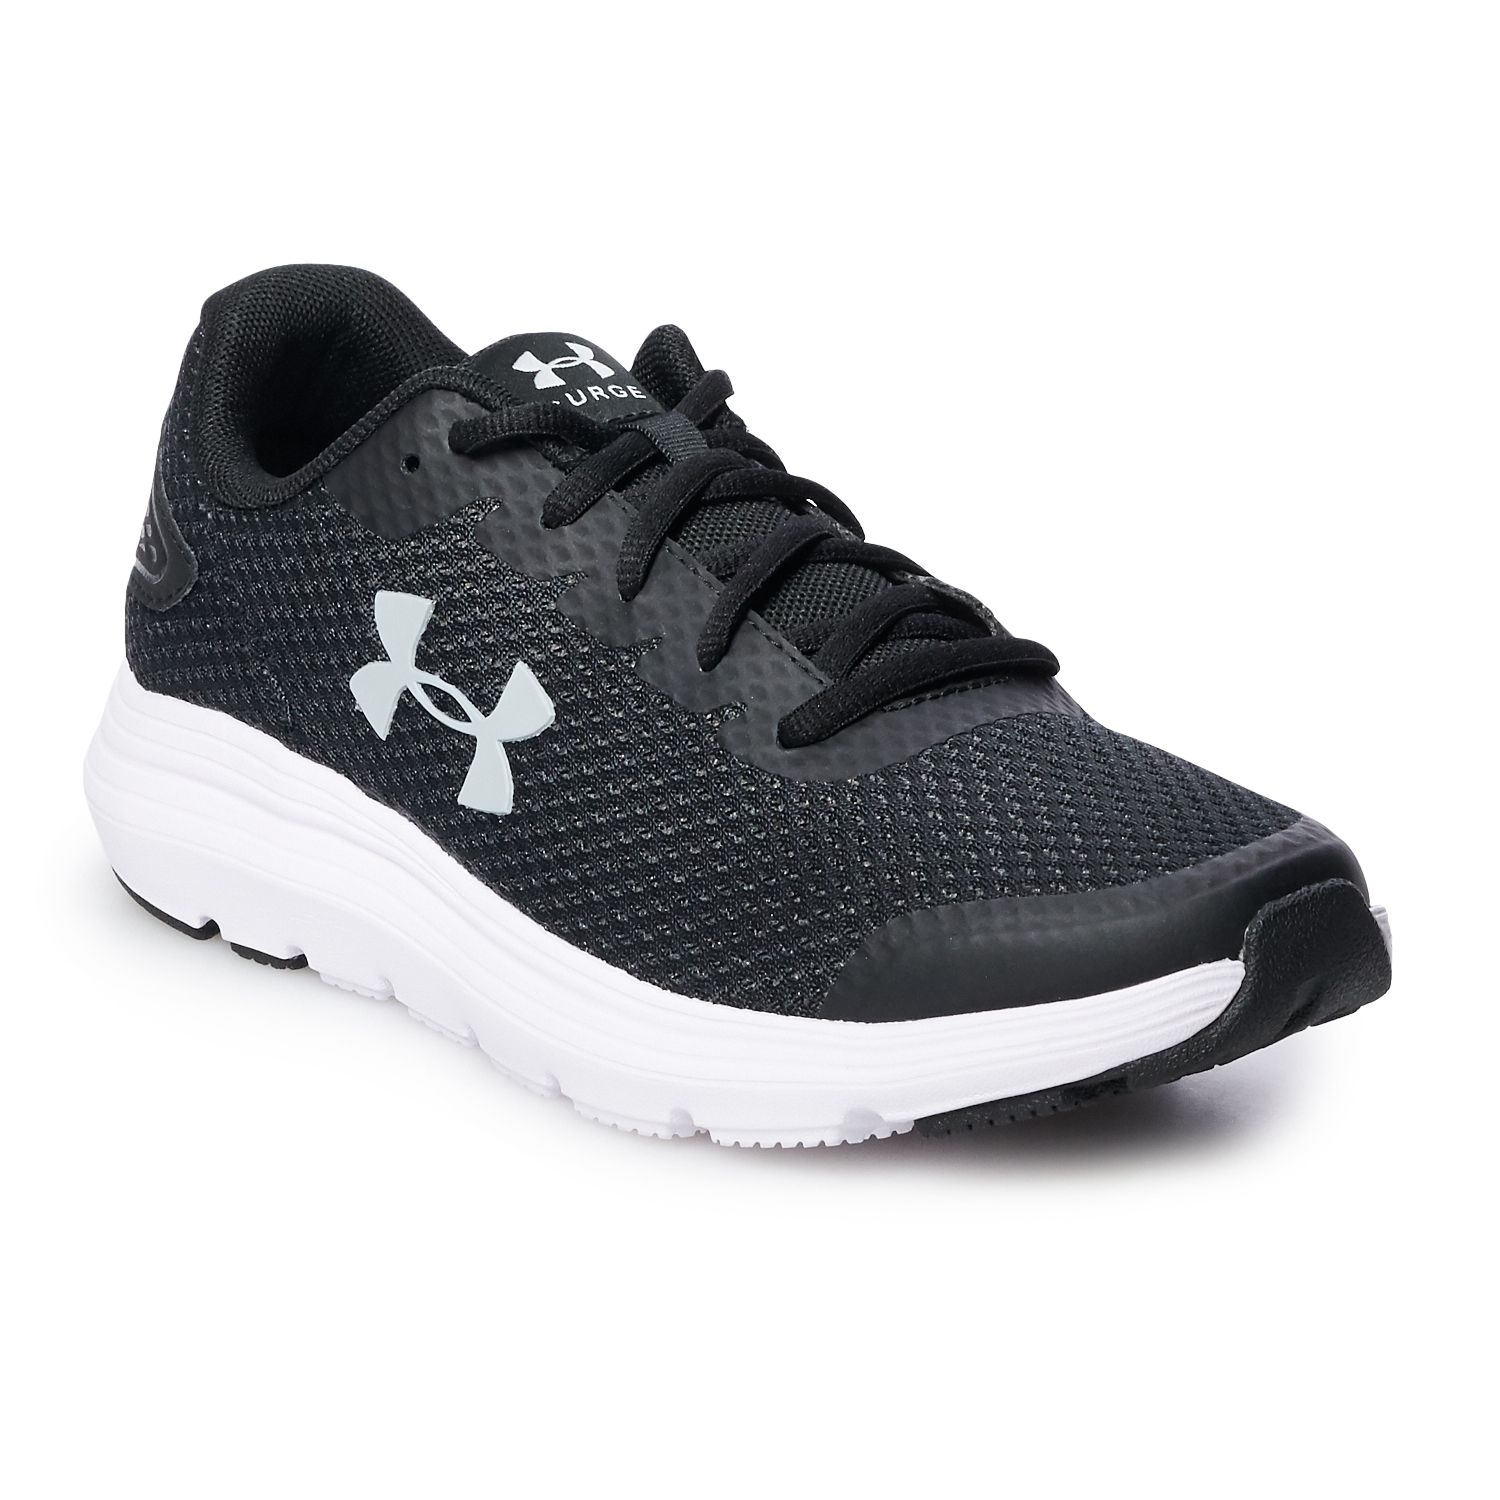 Under Armour Charged Rogue Women's 